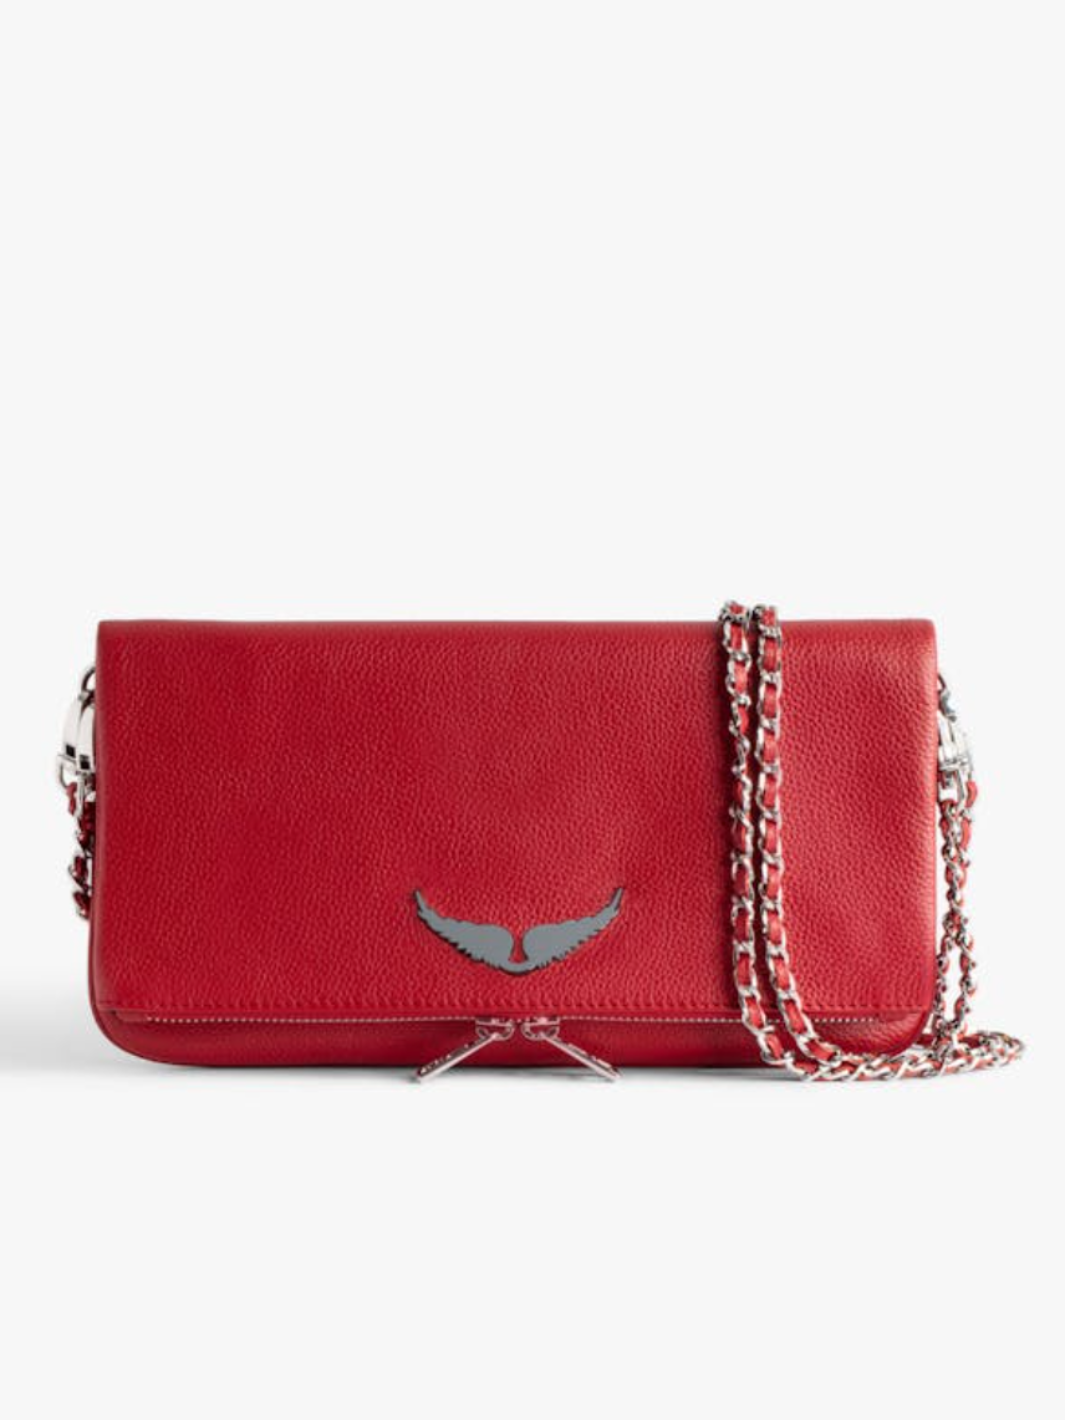 ROCK GRAINED LEATHER SHOULDER BAG IN POWER - Romi Boutique